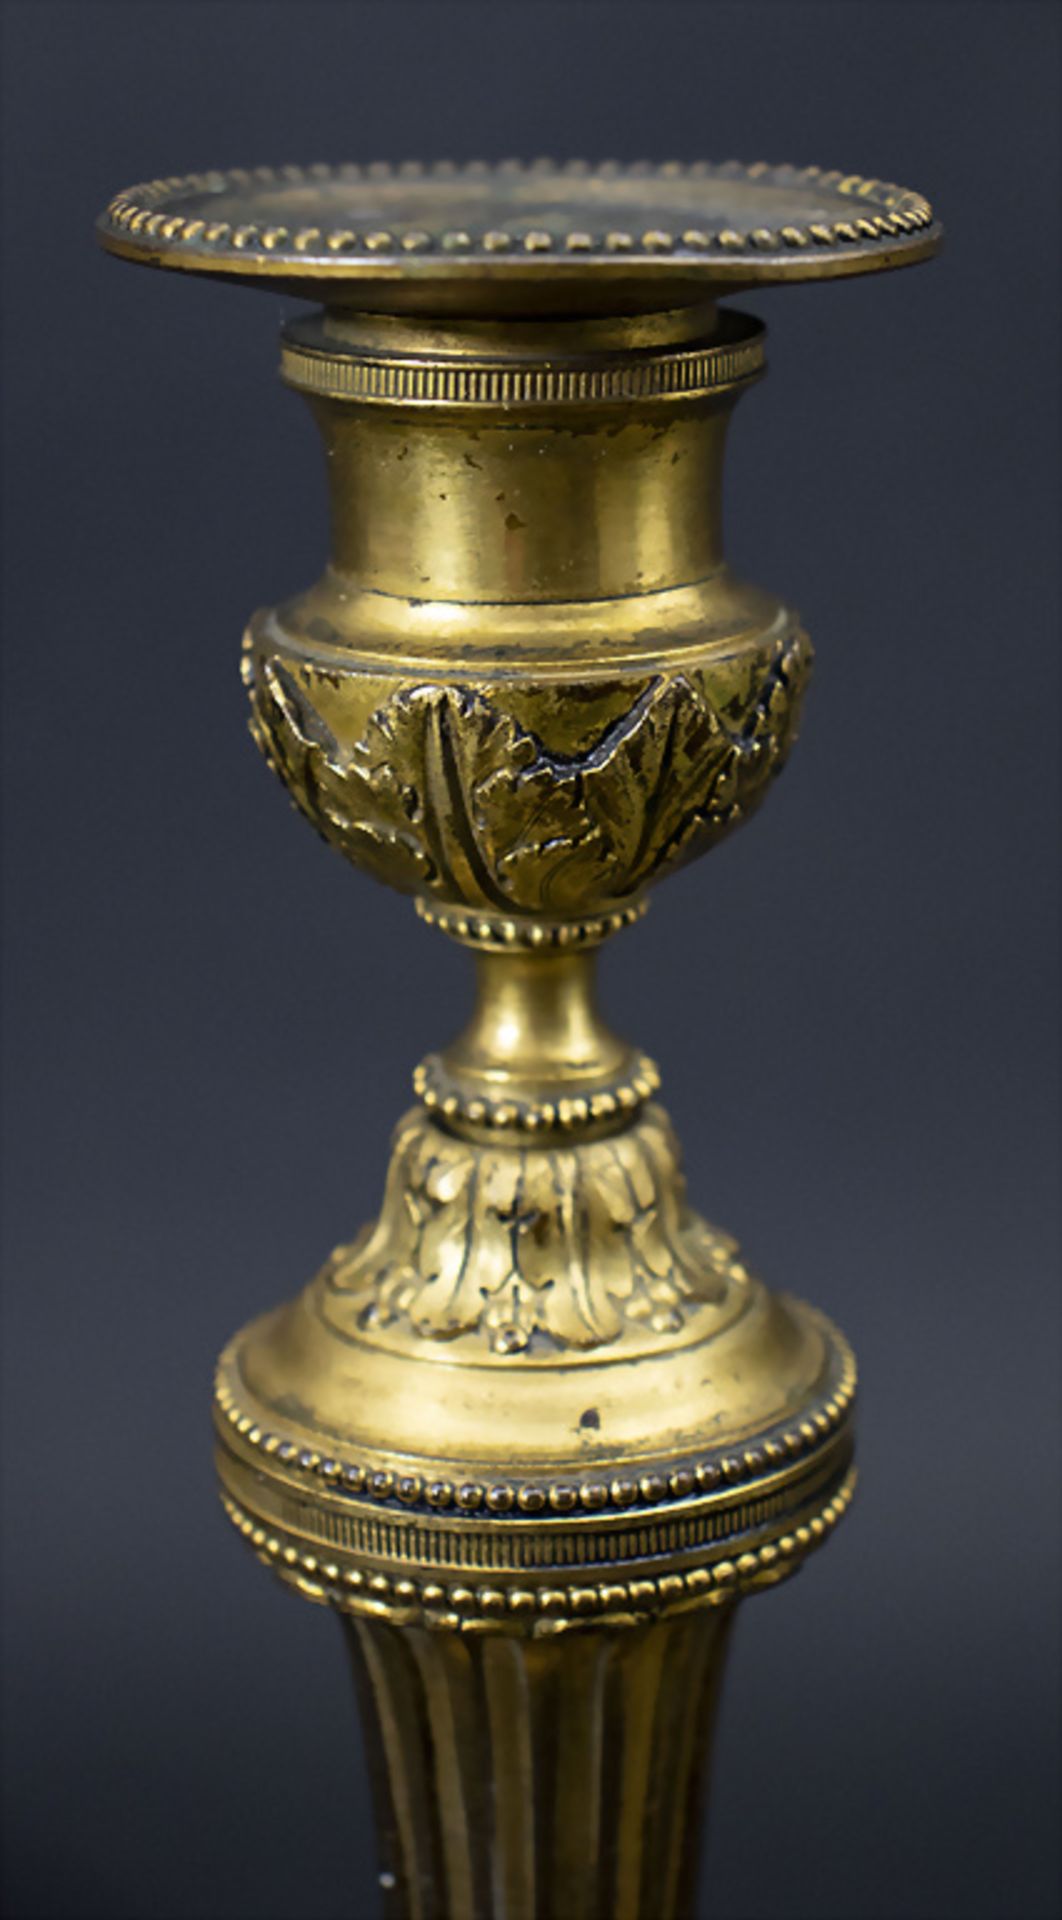 Paar Bronzeleuchter / A pair of bronze candle holders, F.BARBEDIENNE, Frankreich, um 1870 - Image 2 of 4